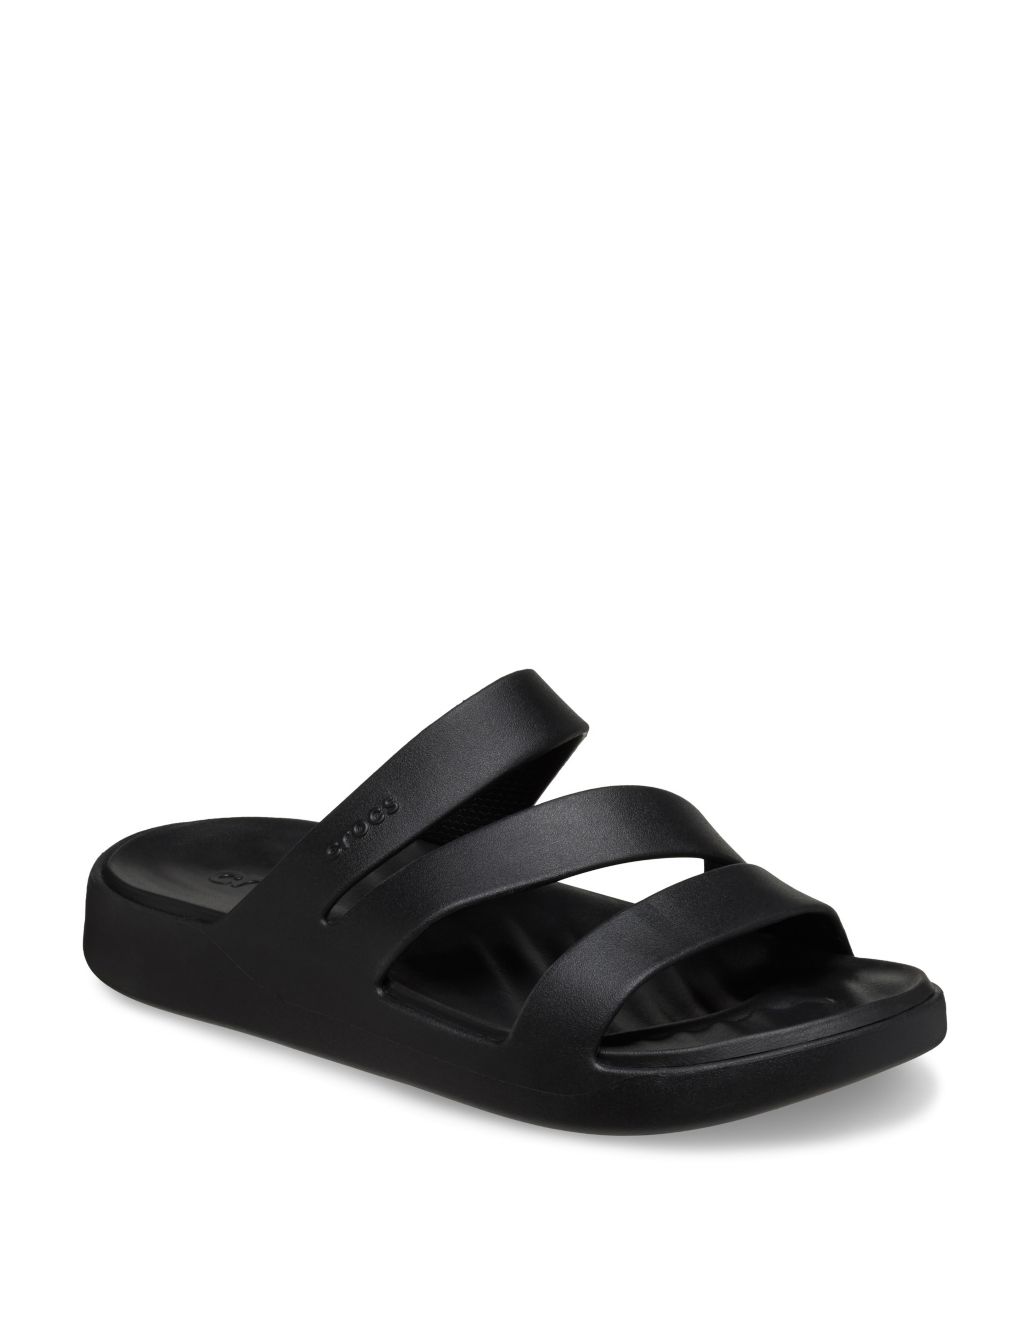 Getaway Strappy Flat Sandals 1 of 8